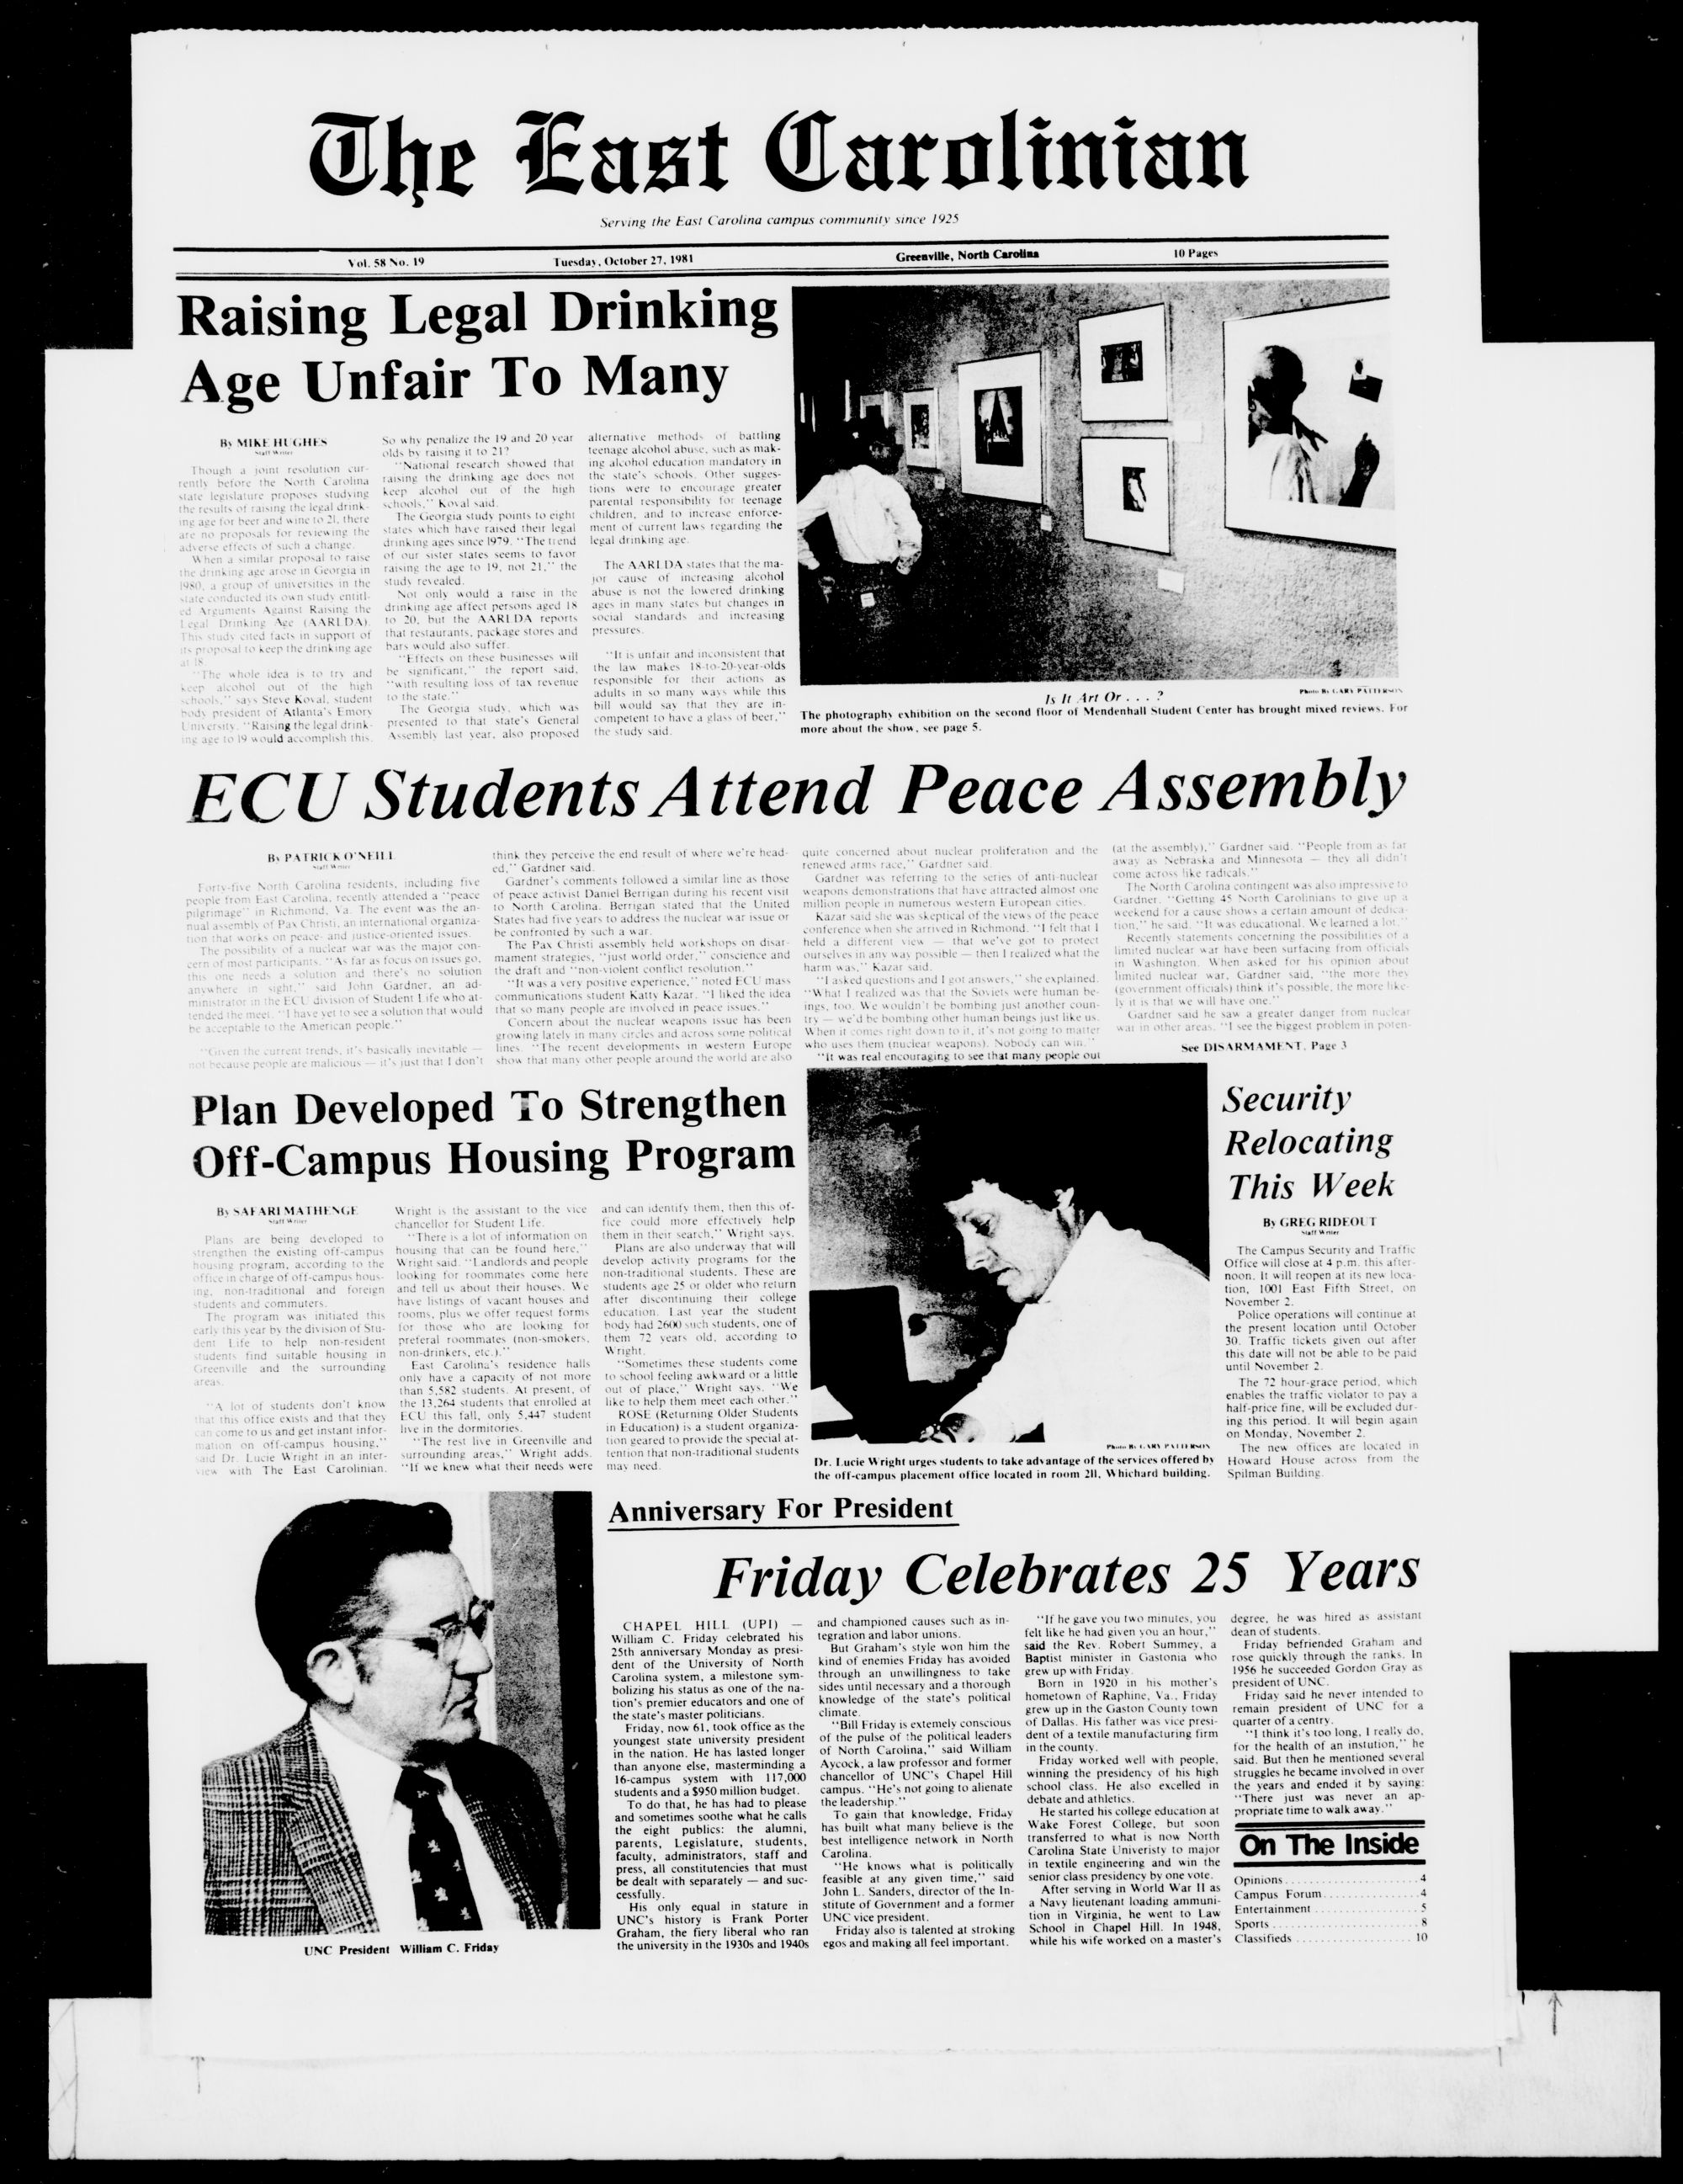 The Carolinian, October 27, 1981 - Collections